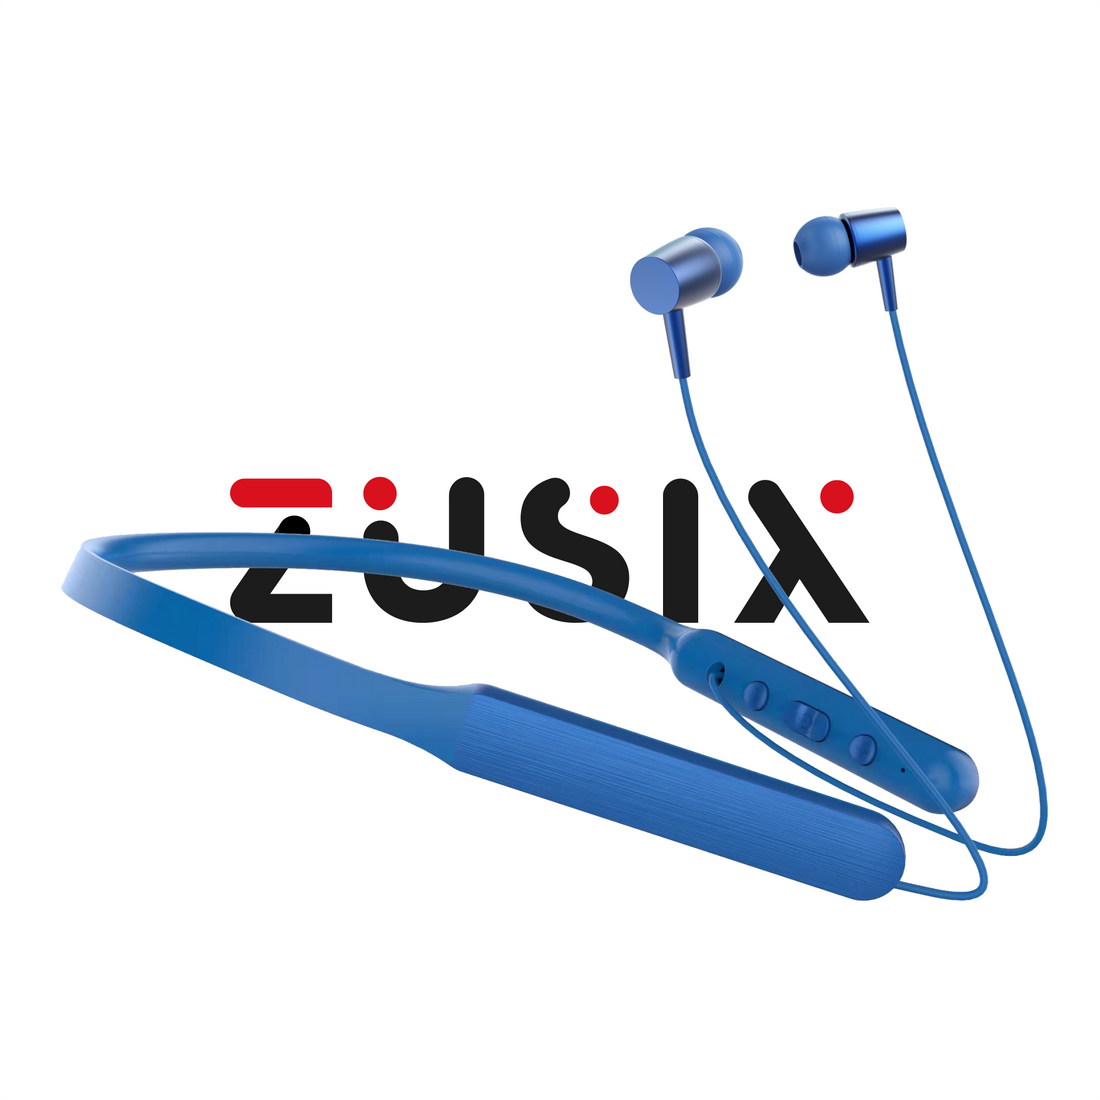 Zusix Elite 60 with 18 Hours Music Time In-Ear Wireless Neckband v5.3 Bluetooth Headset